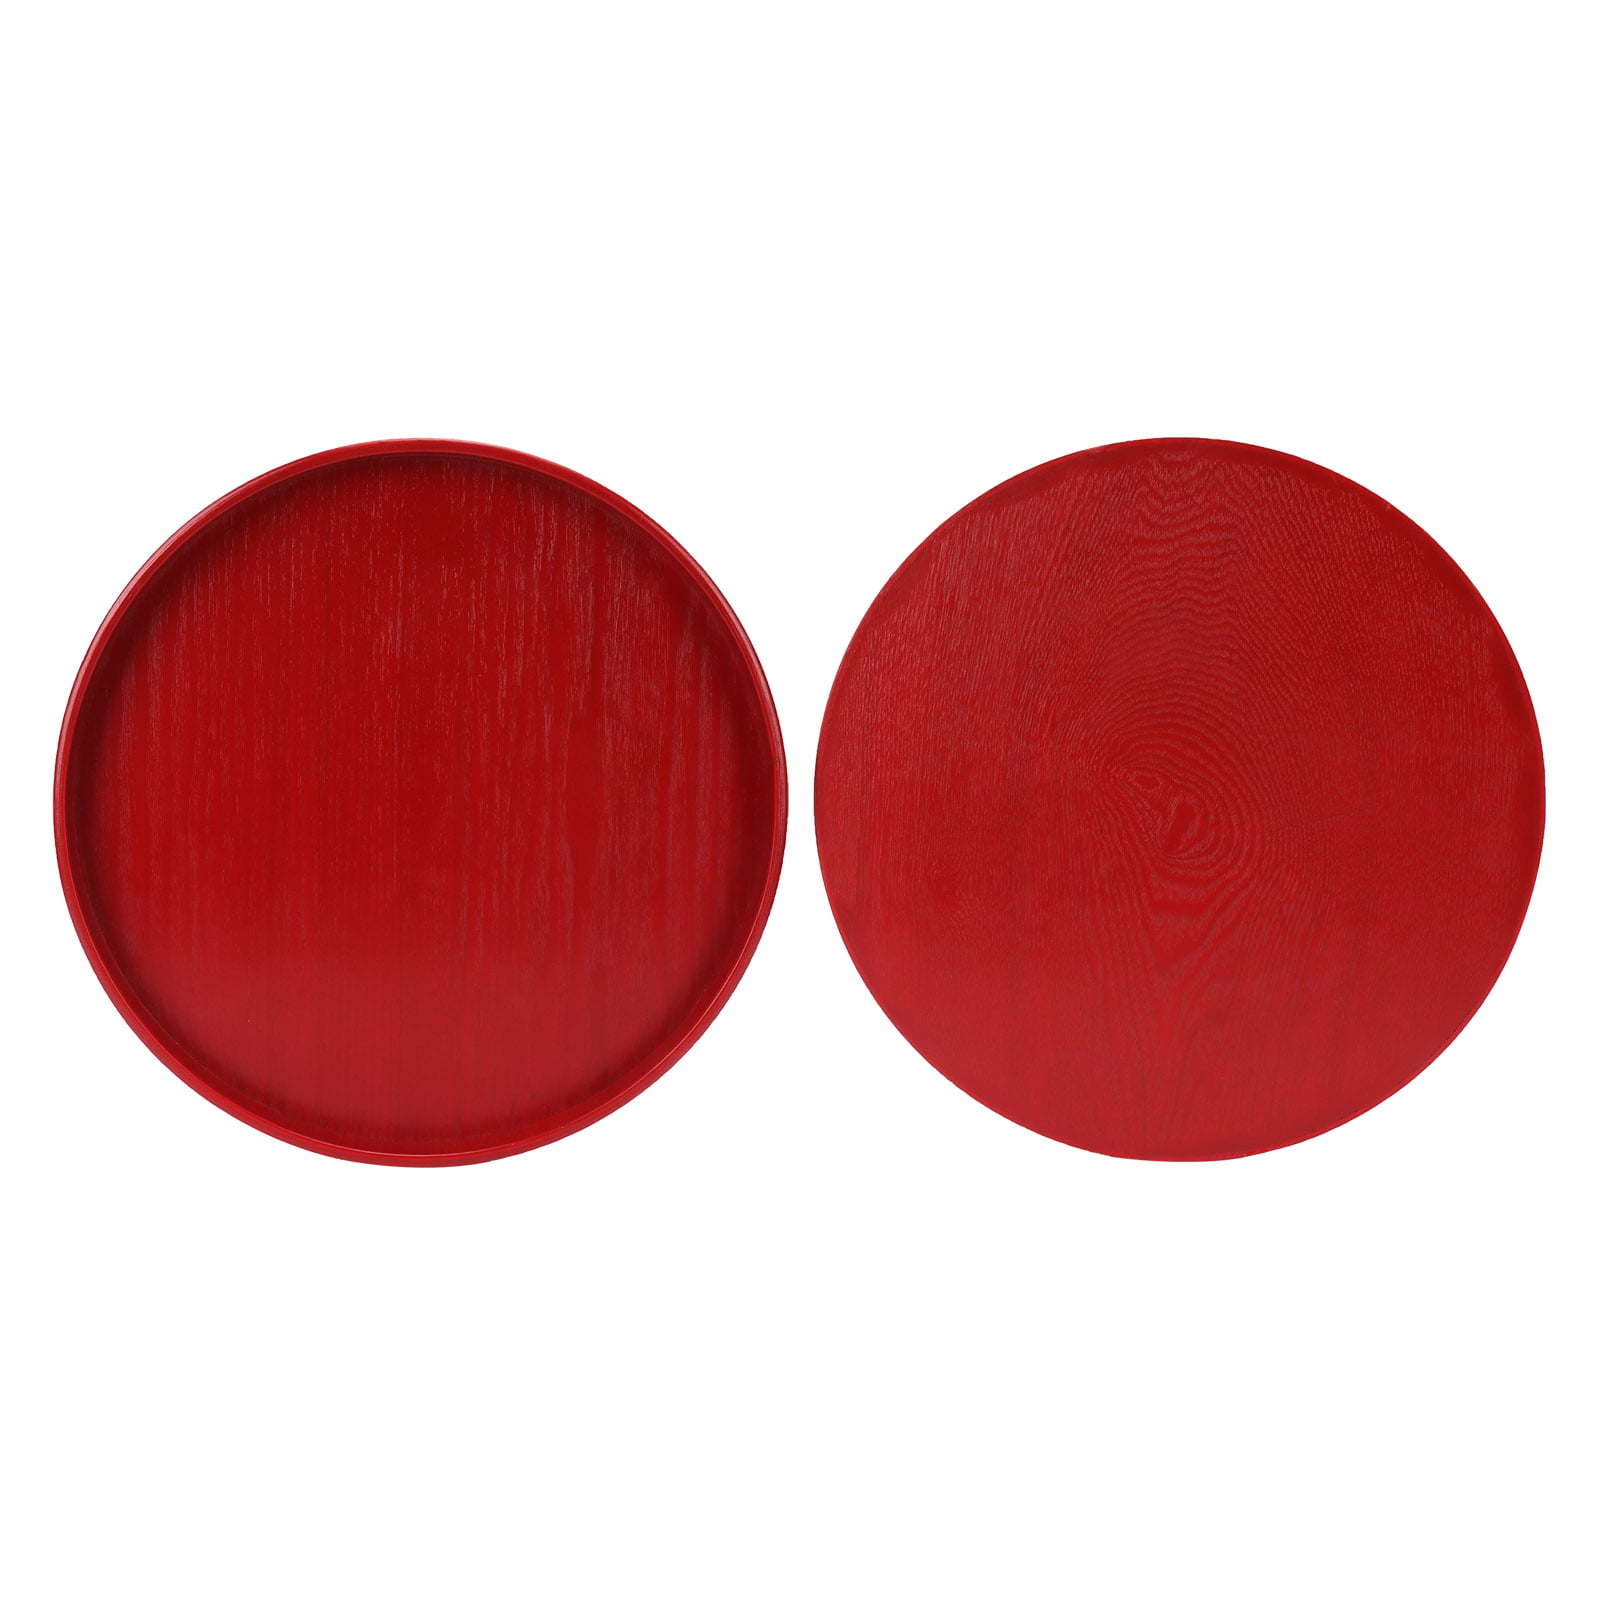 Details about   Red Round Wooden Plate Food Grade Fruit Cutlery Tray For Kitchen Home Restauran 